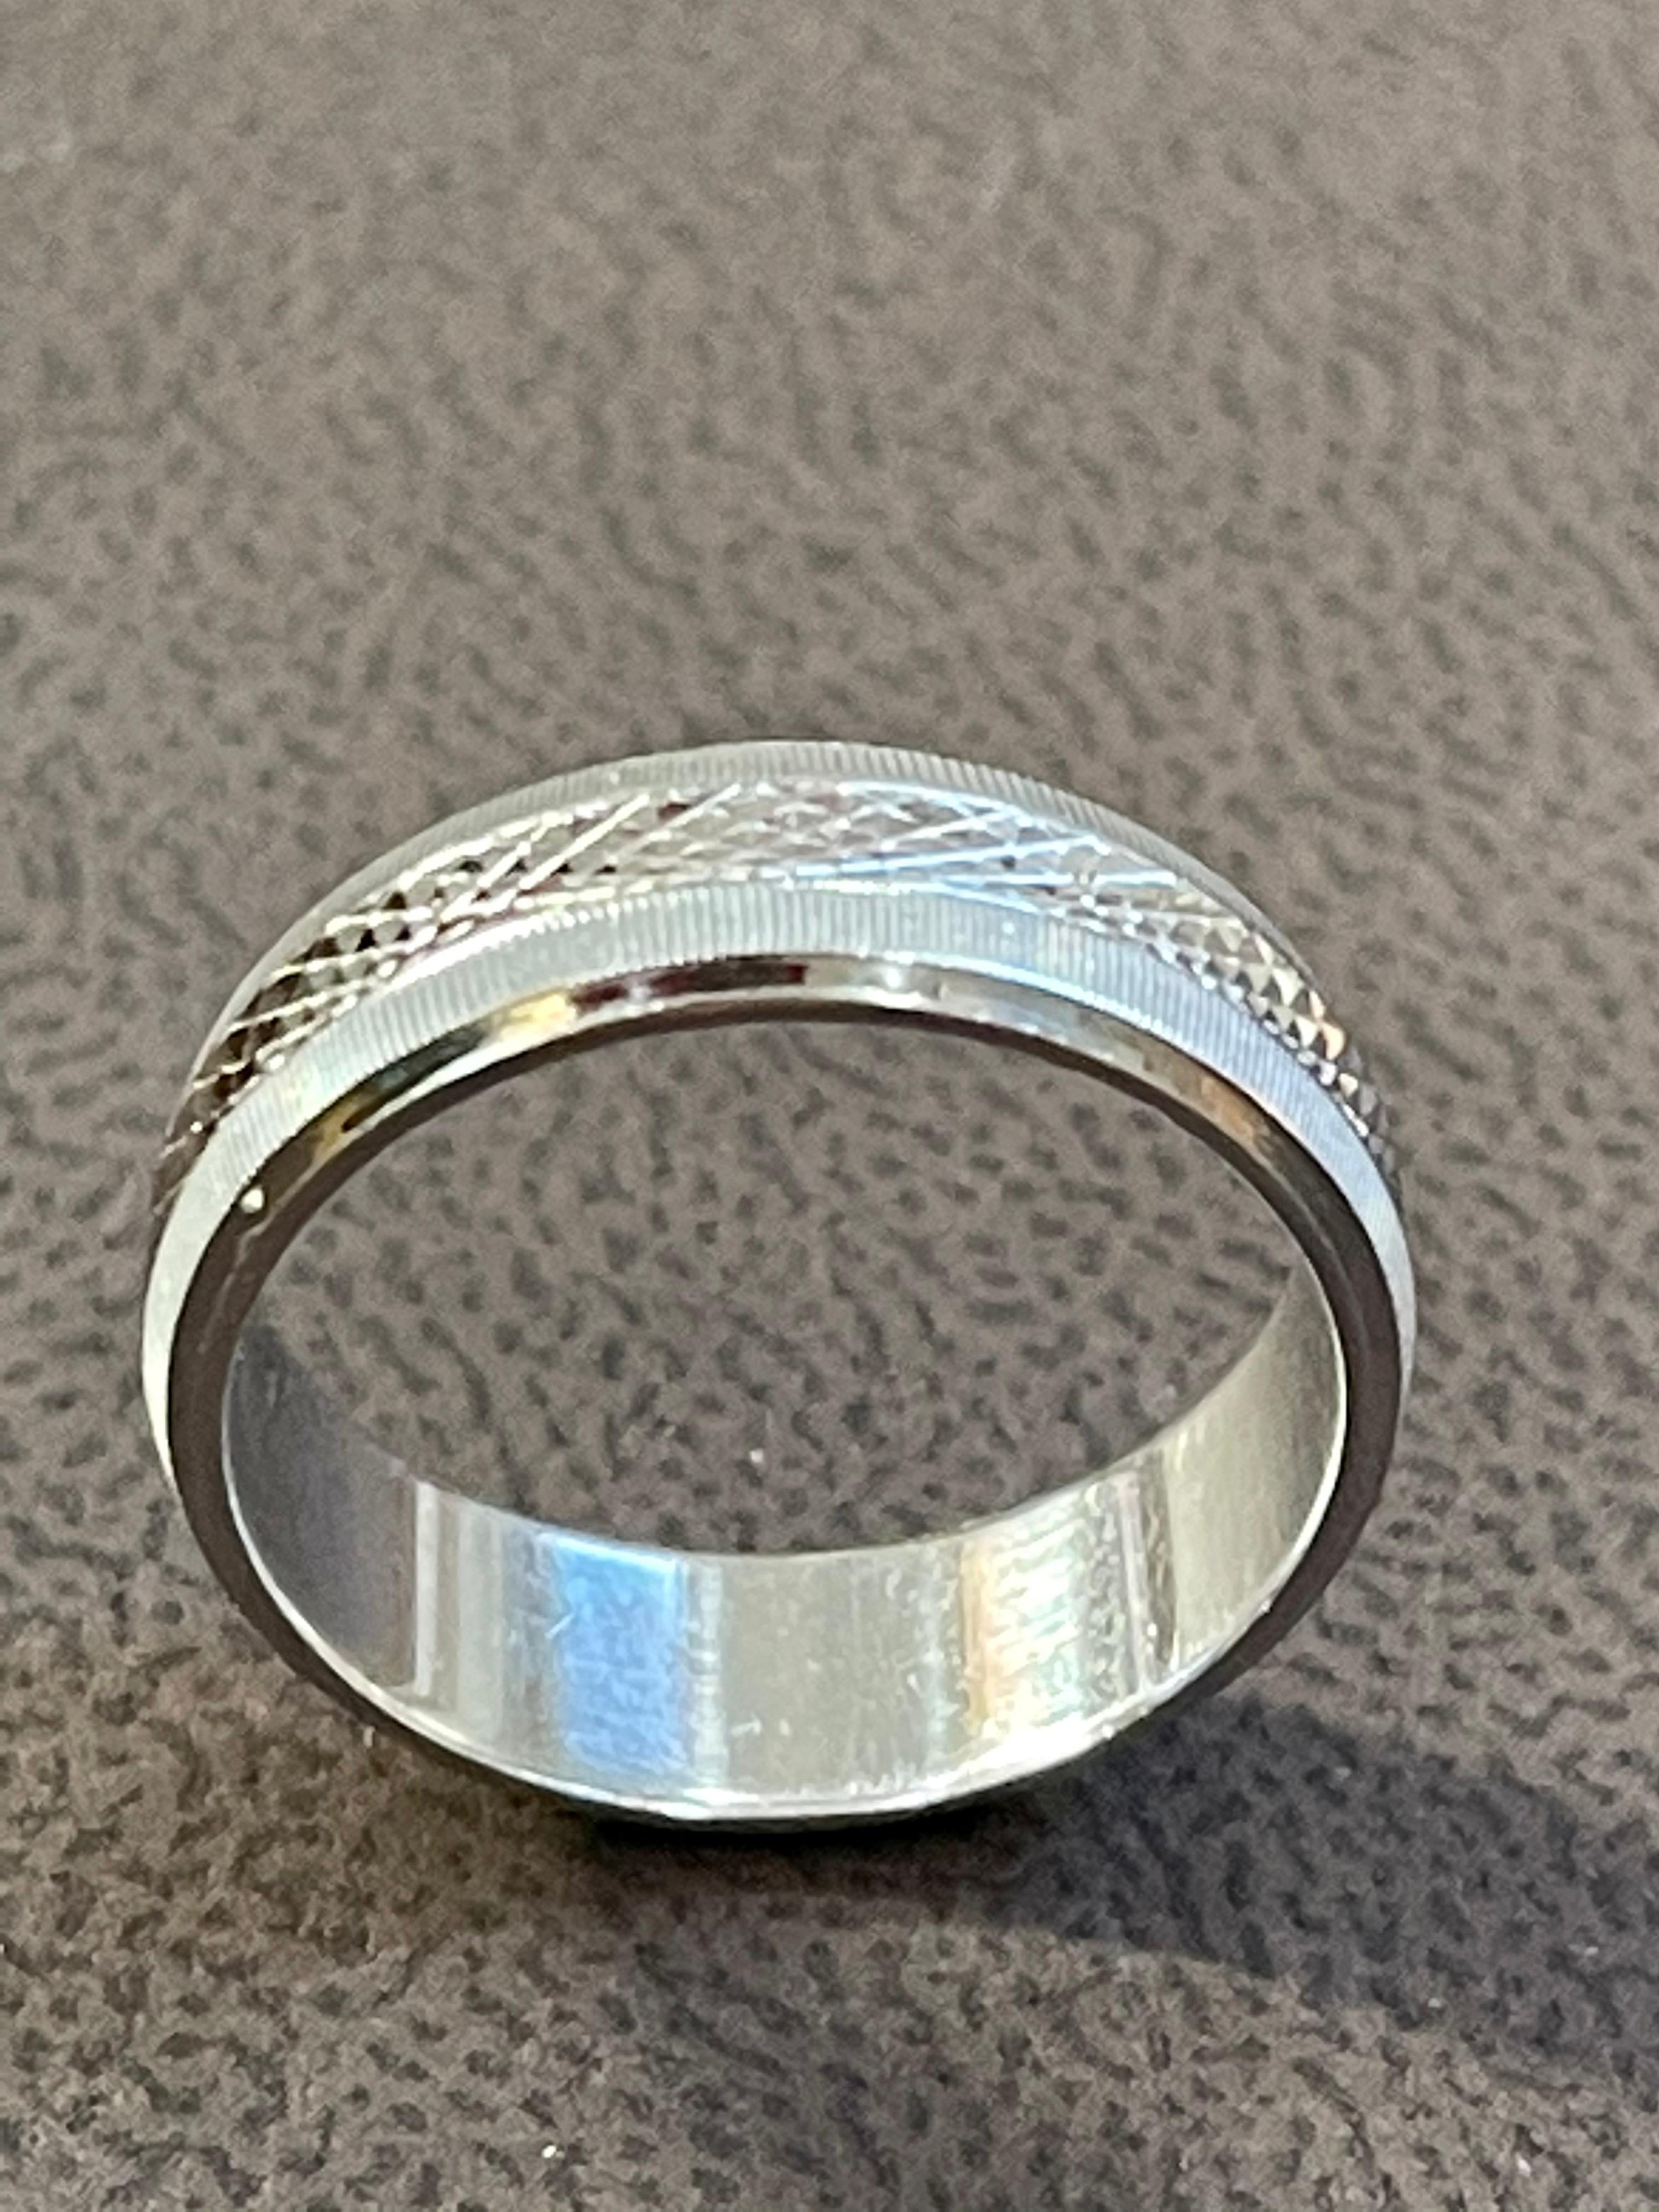 
14 Karat White Gold Classic Wide Wedding Band Ring, Unisex Size 6 & 1/2
This timeless style adds a Light classic Design at the middle of the band , all over  band
Quality craftsmanship makes this long lasting band a great value. rounded inside edge